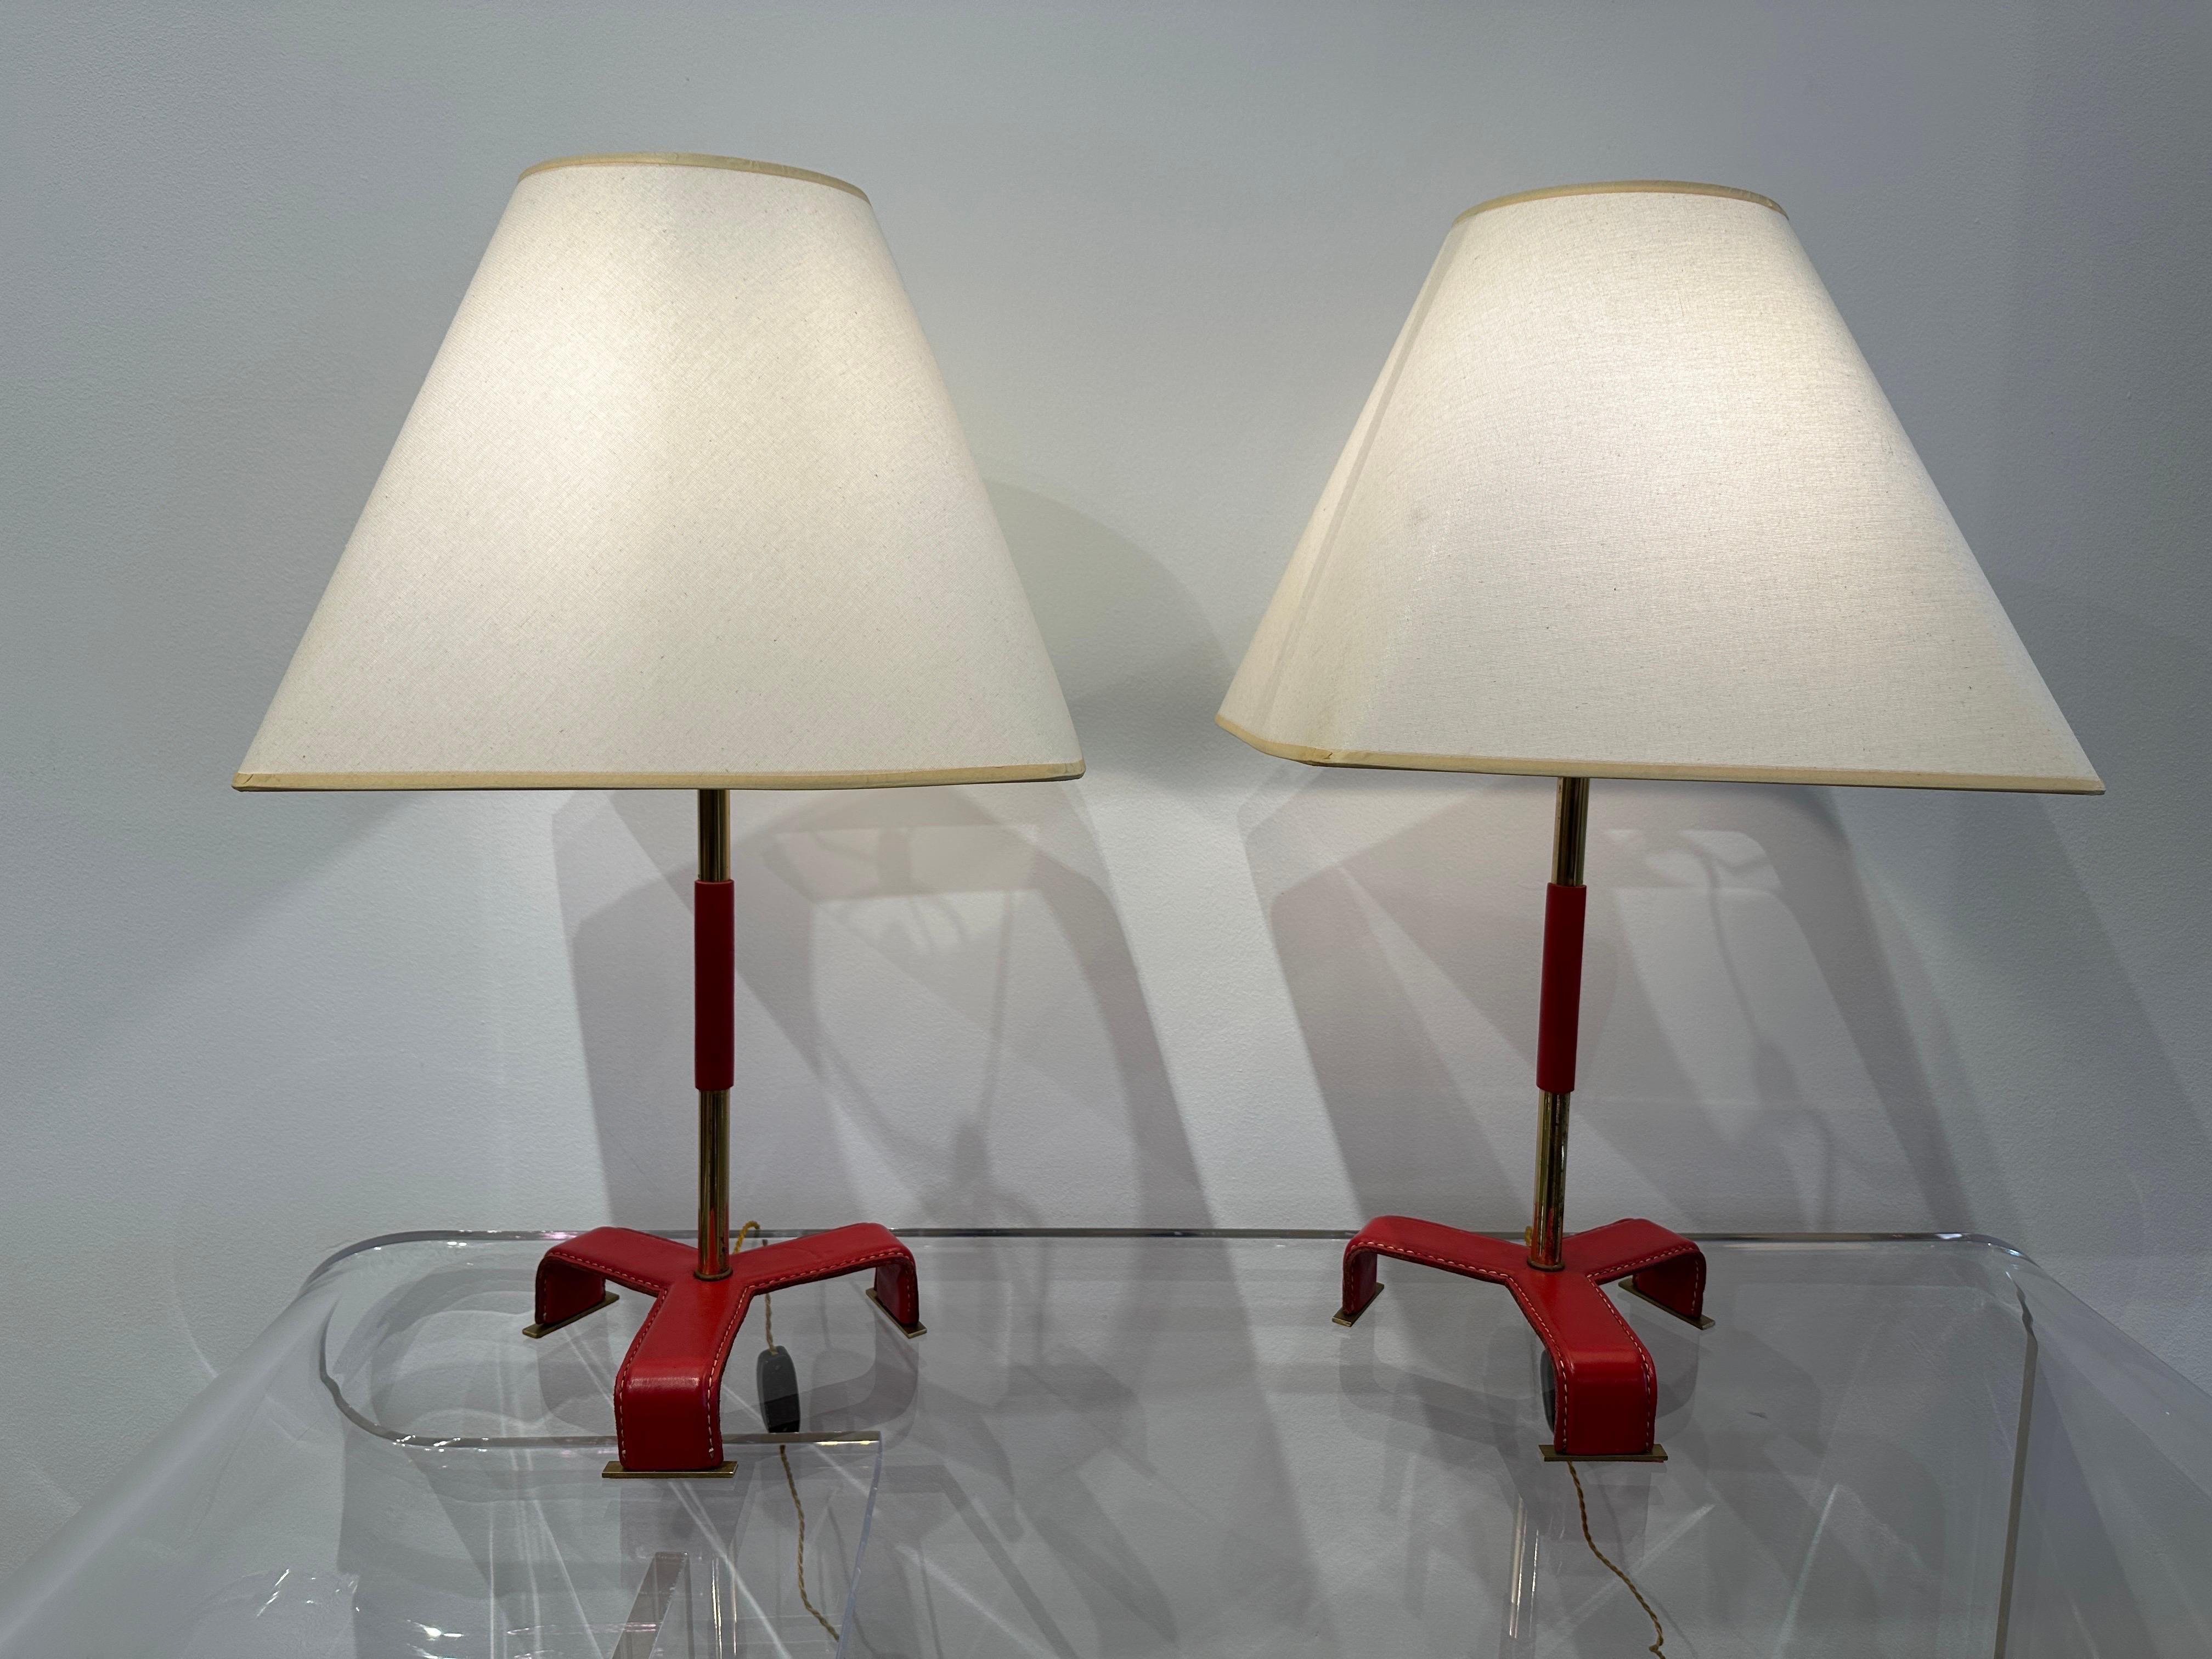 Vintage Pair of Jacques Adnet style Red Stitched Leather Table Lamps, 1950's For Sale 5